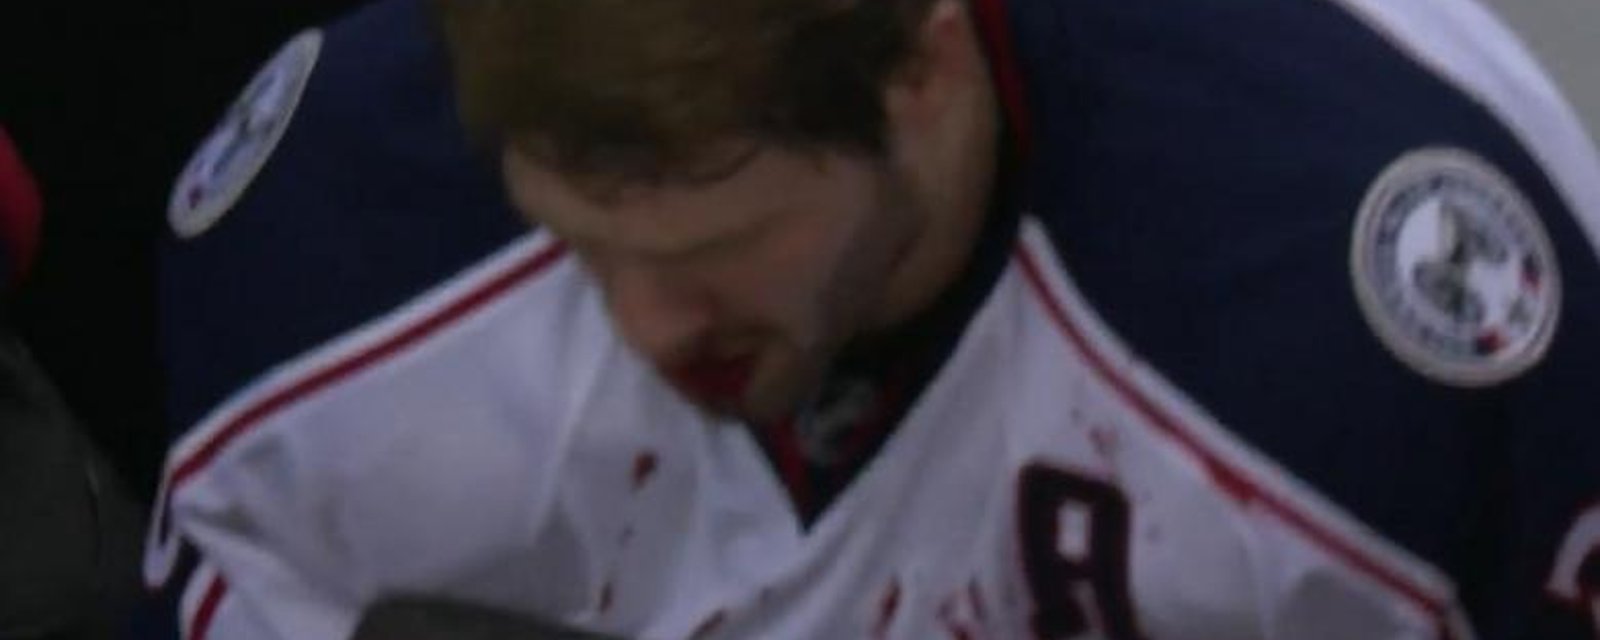 Jenner gets busted open and loses a few teeth in the process.